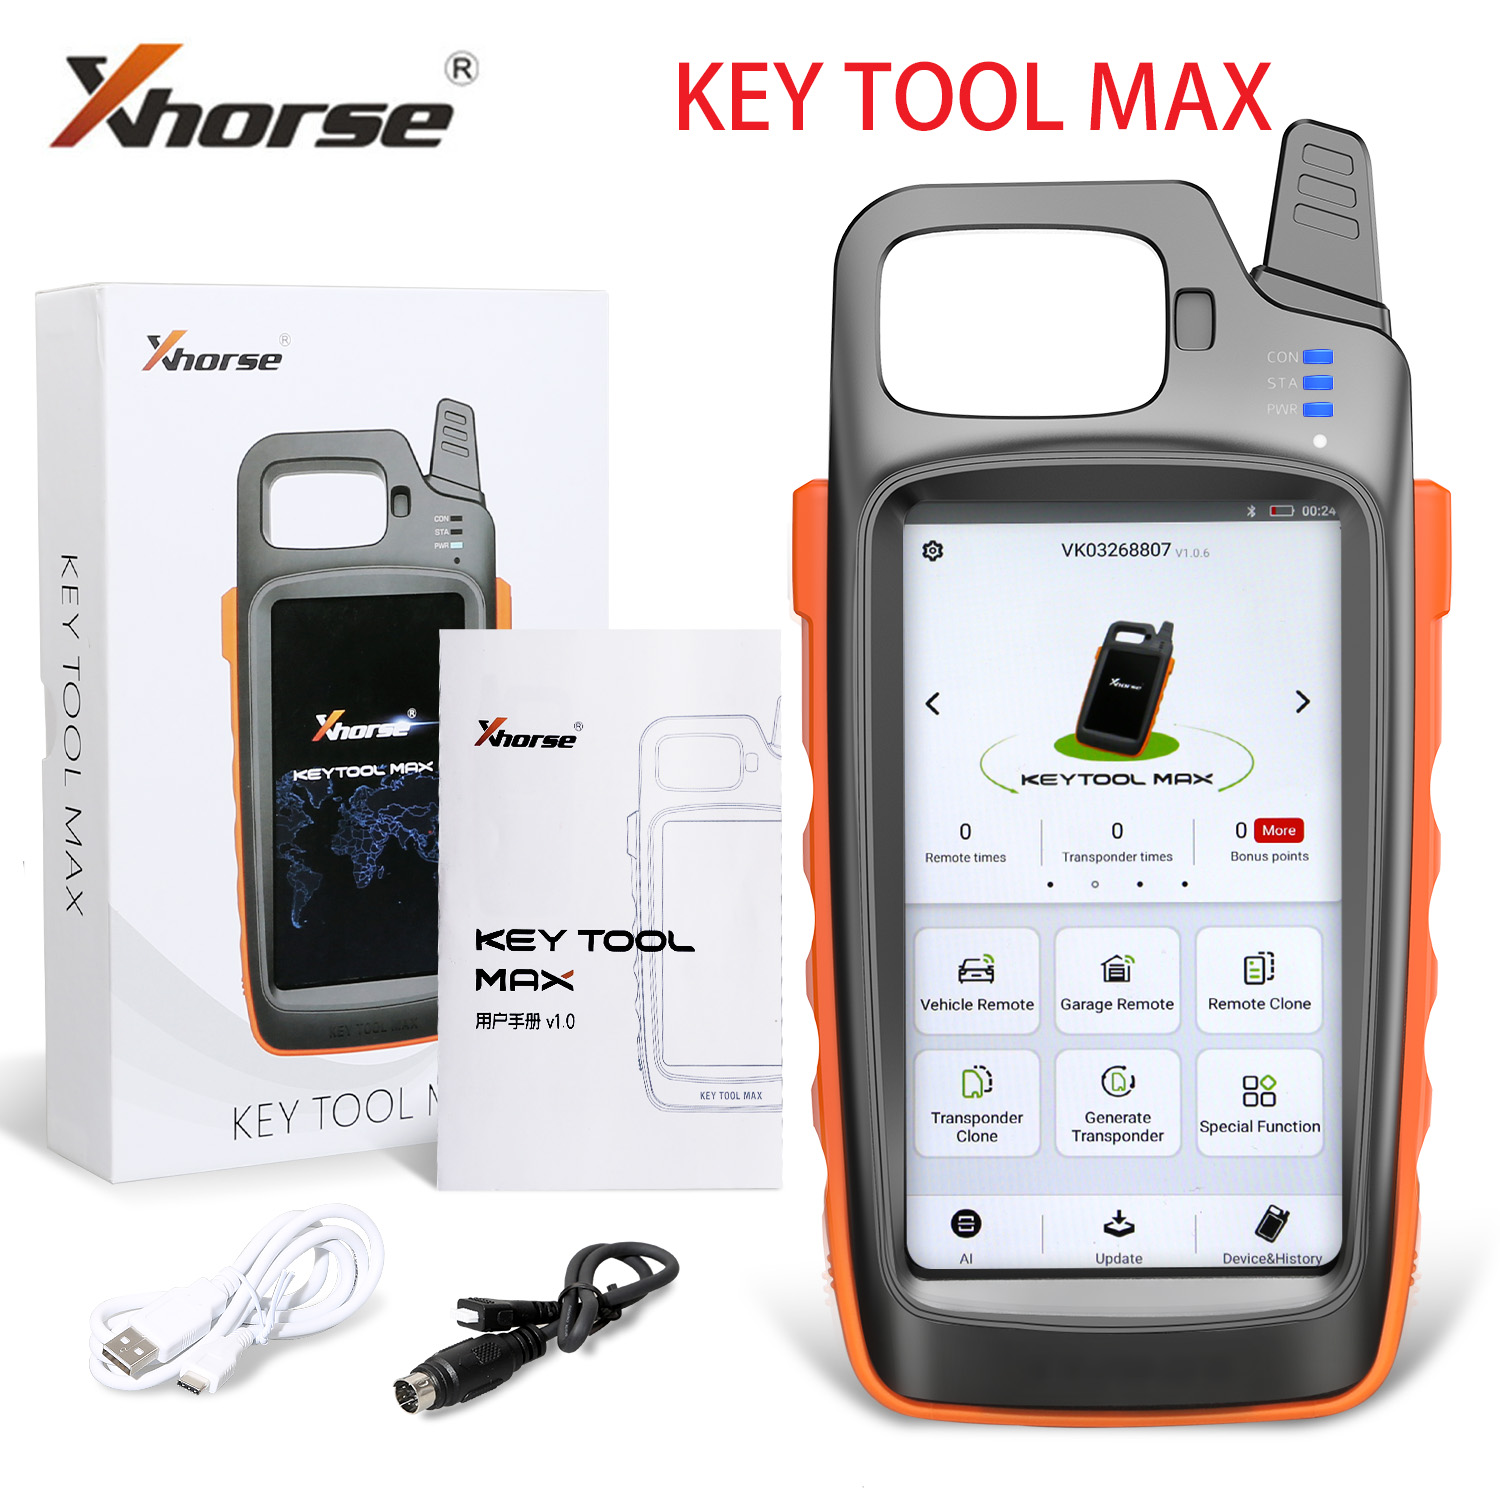 XHORSE KEY TOOL MAX Package